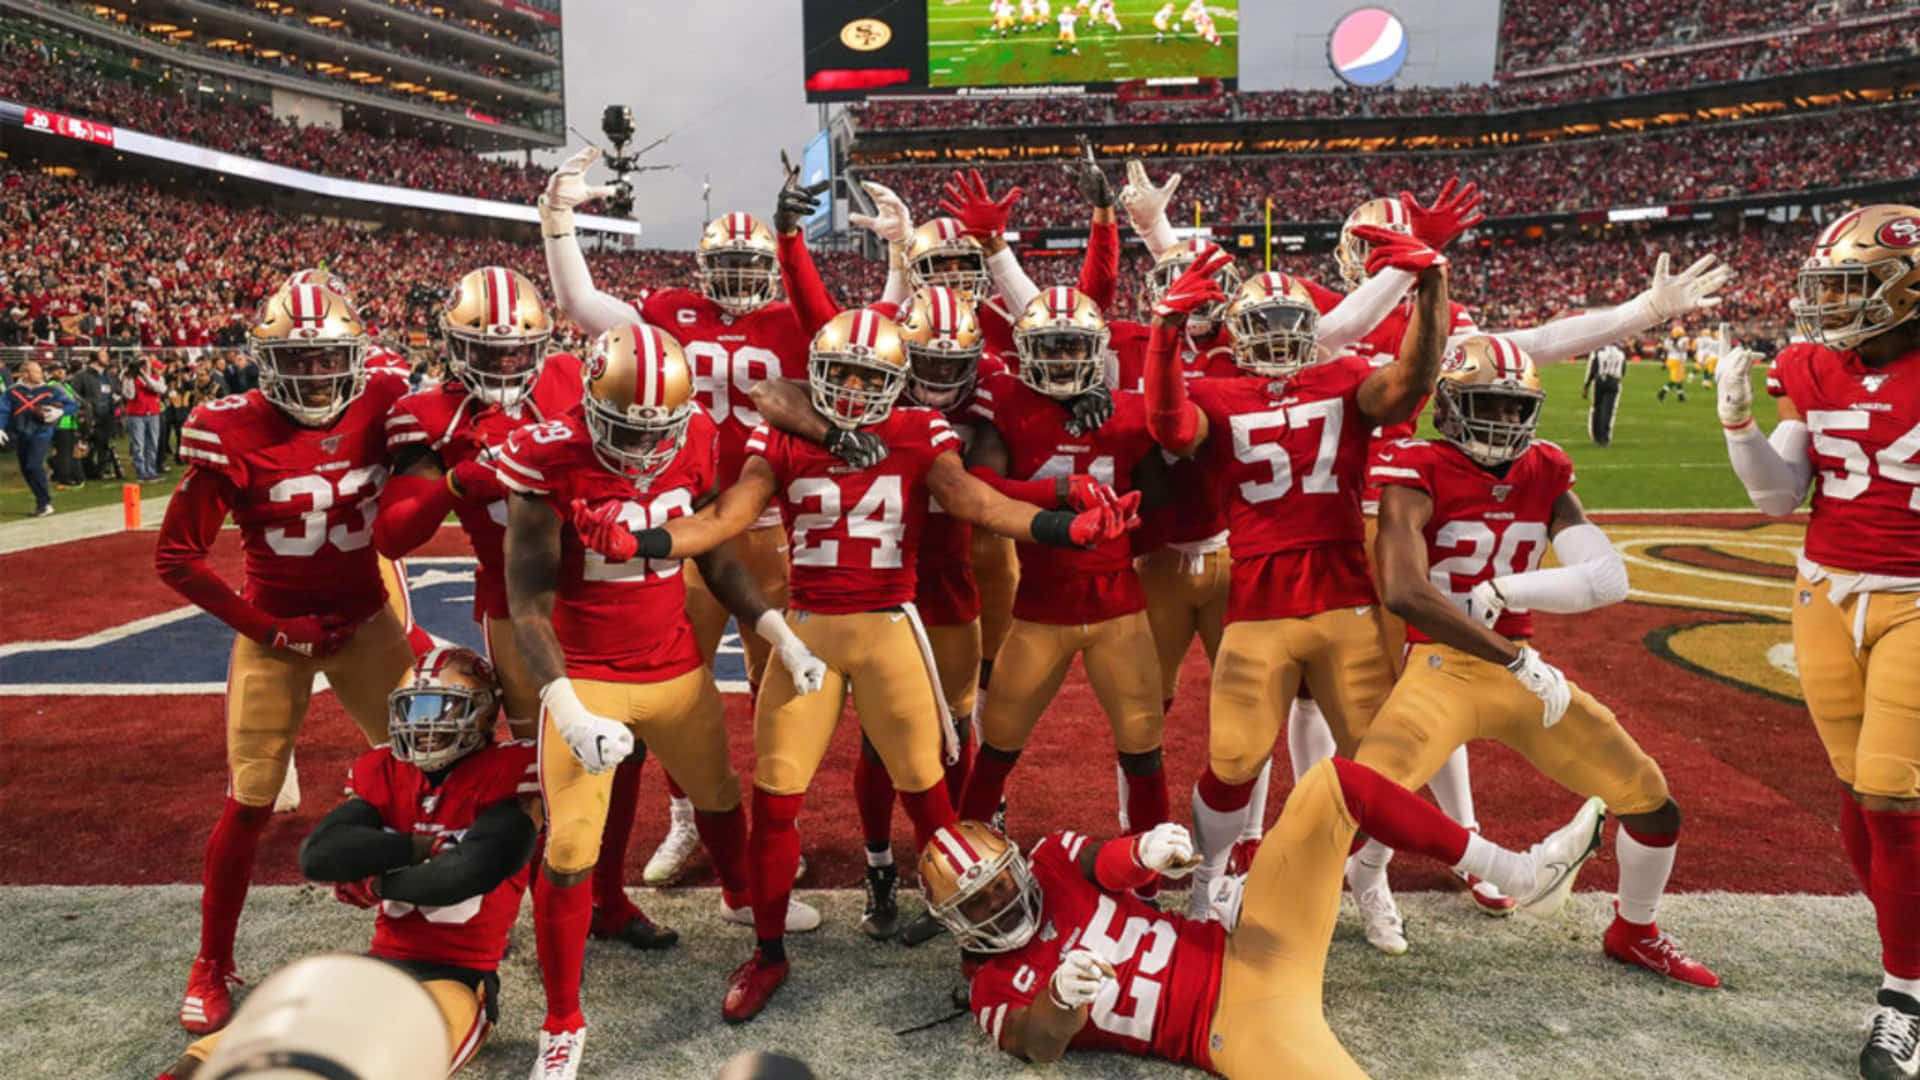 Show Your Support for the San Francisco 49ers!